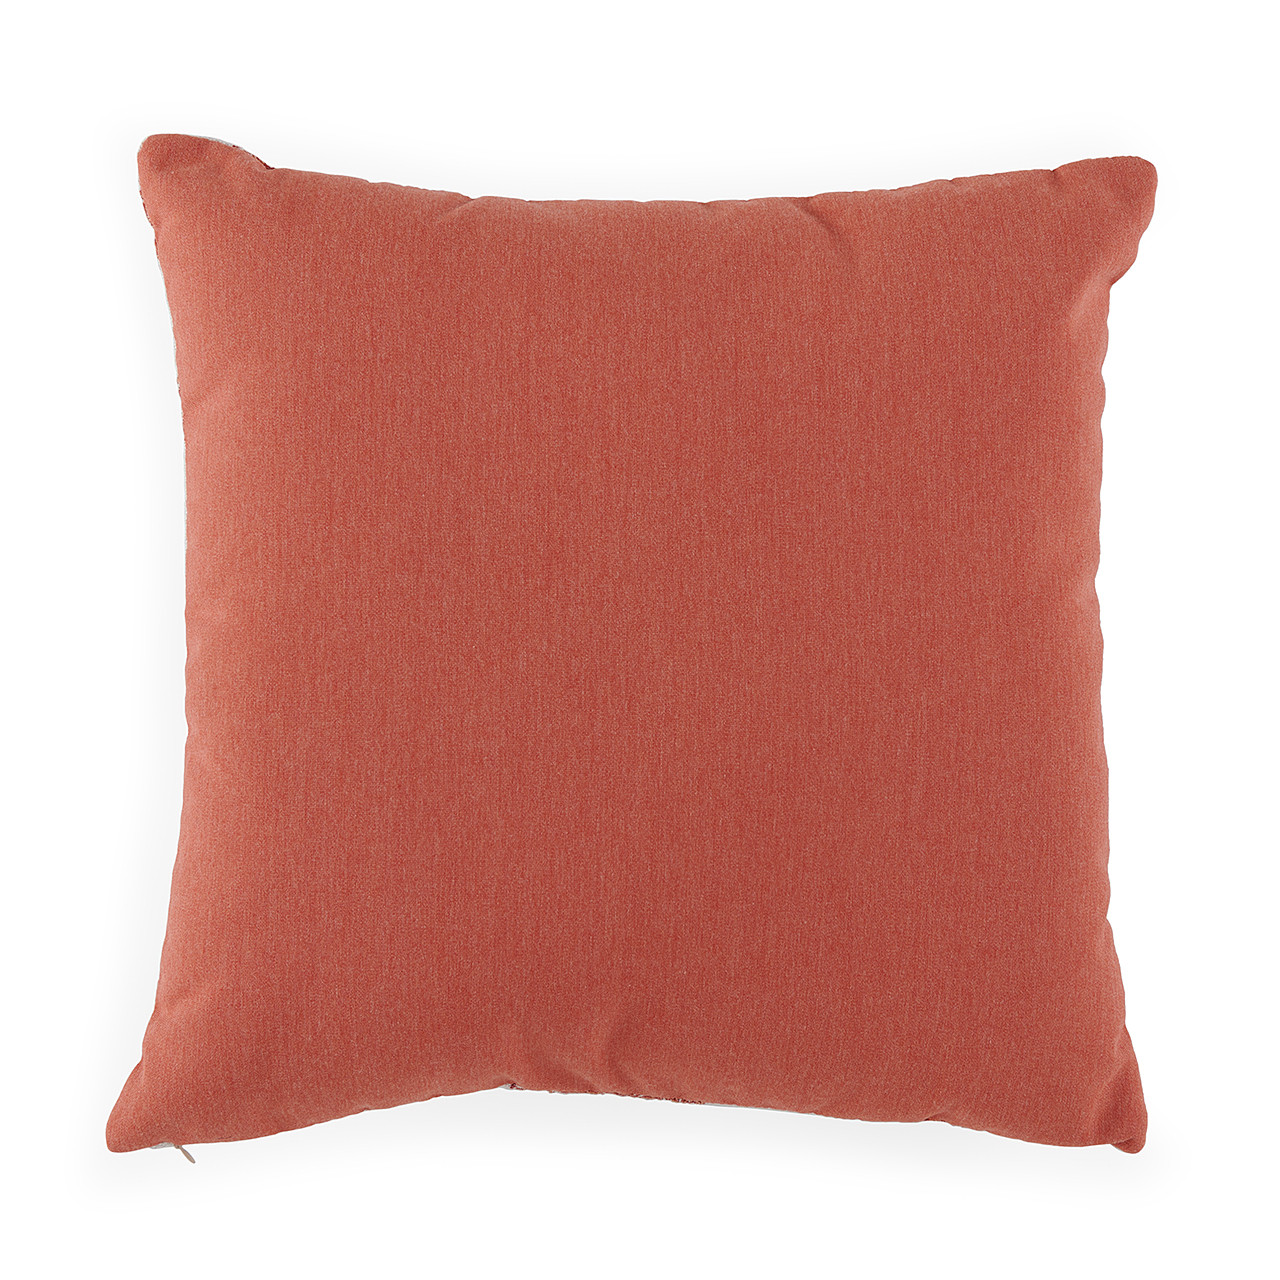 Canvas Persimmon and Royal Pointe Pomegranate 18 in. Sq. Throw Pillow